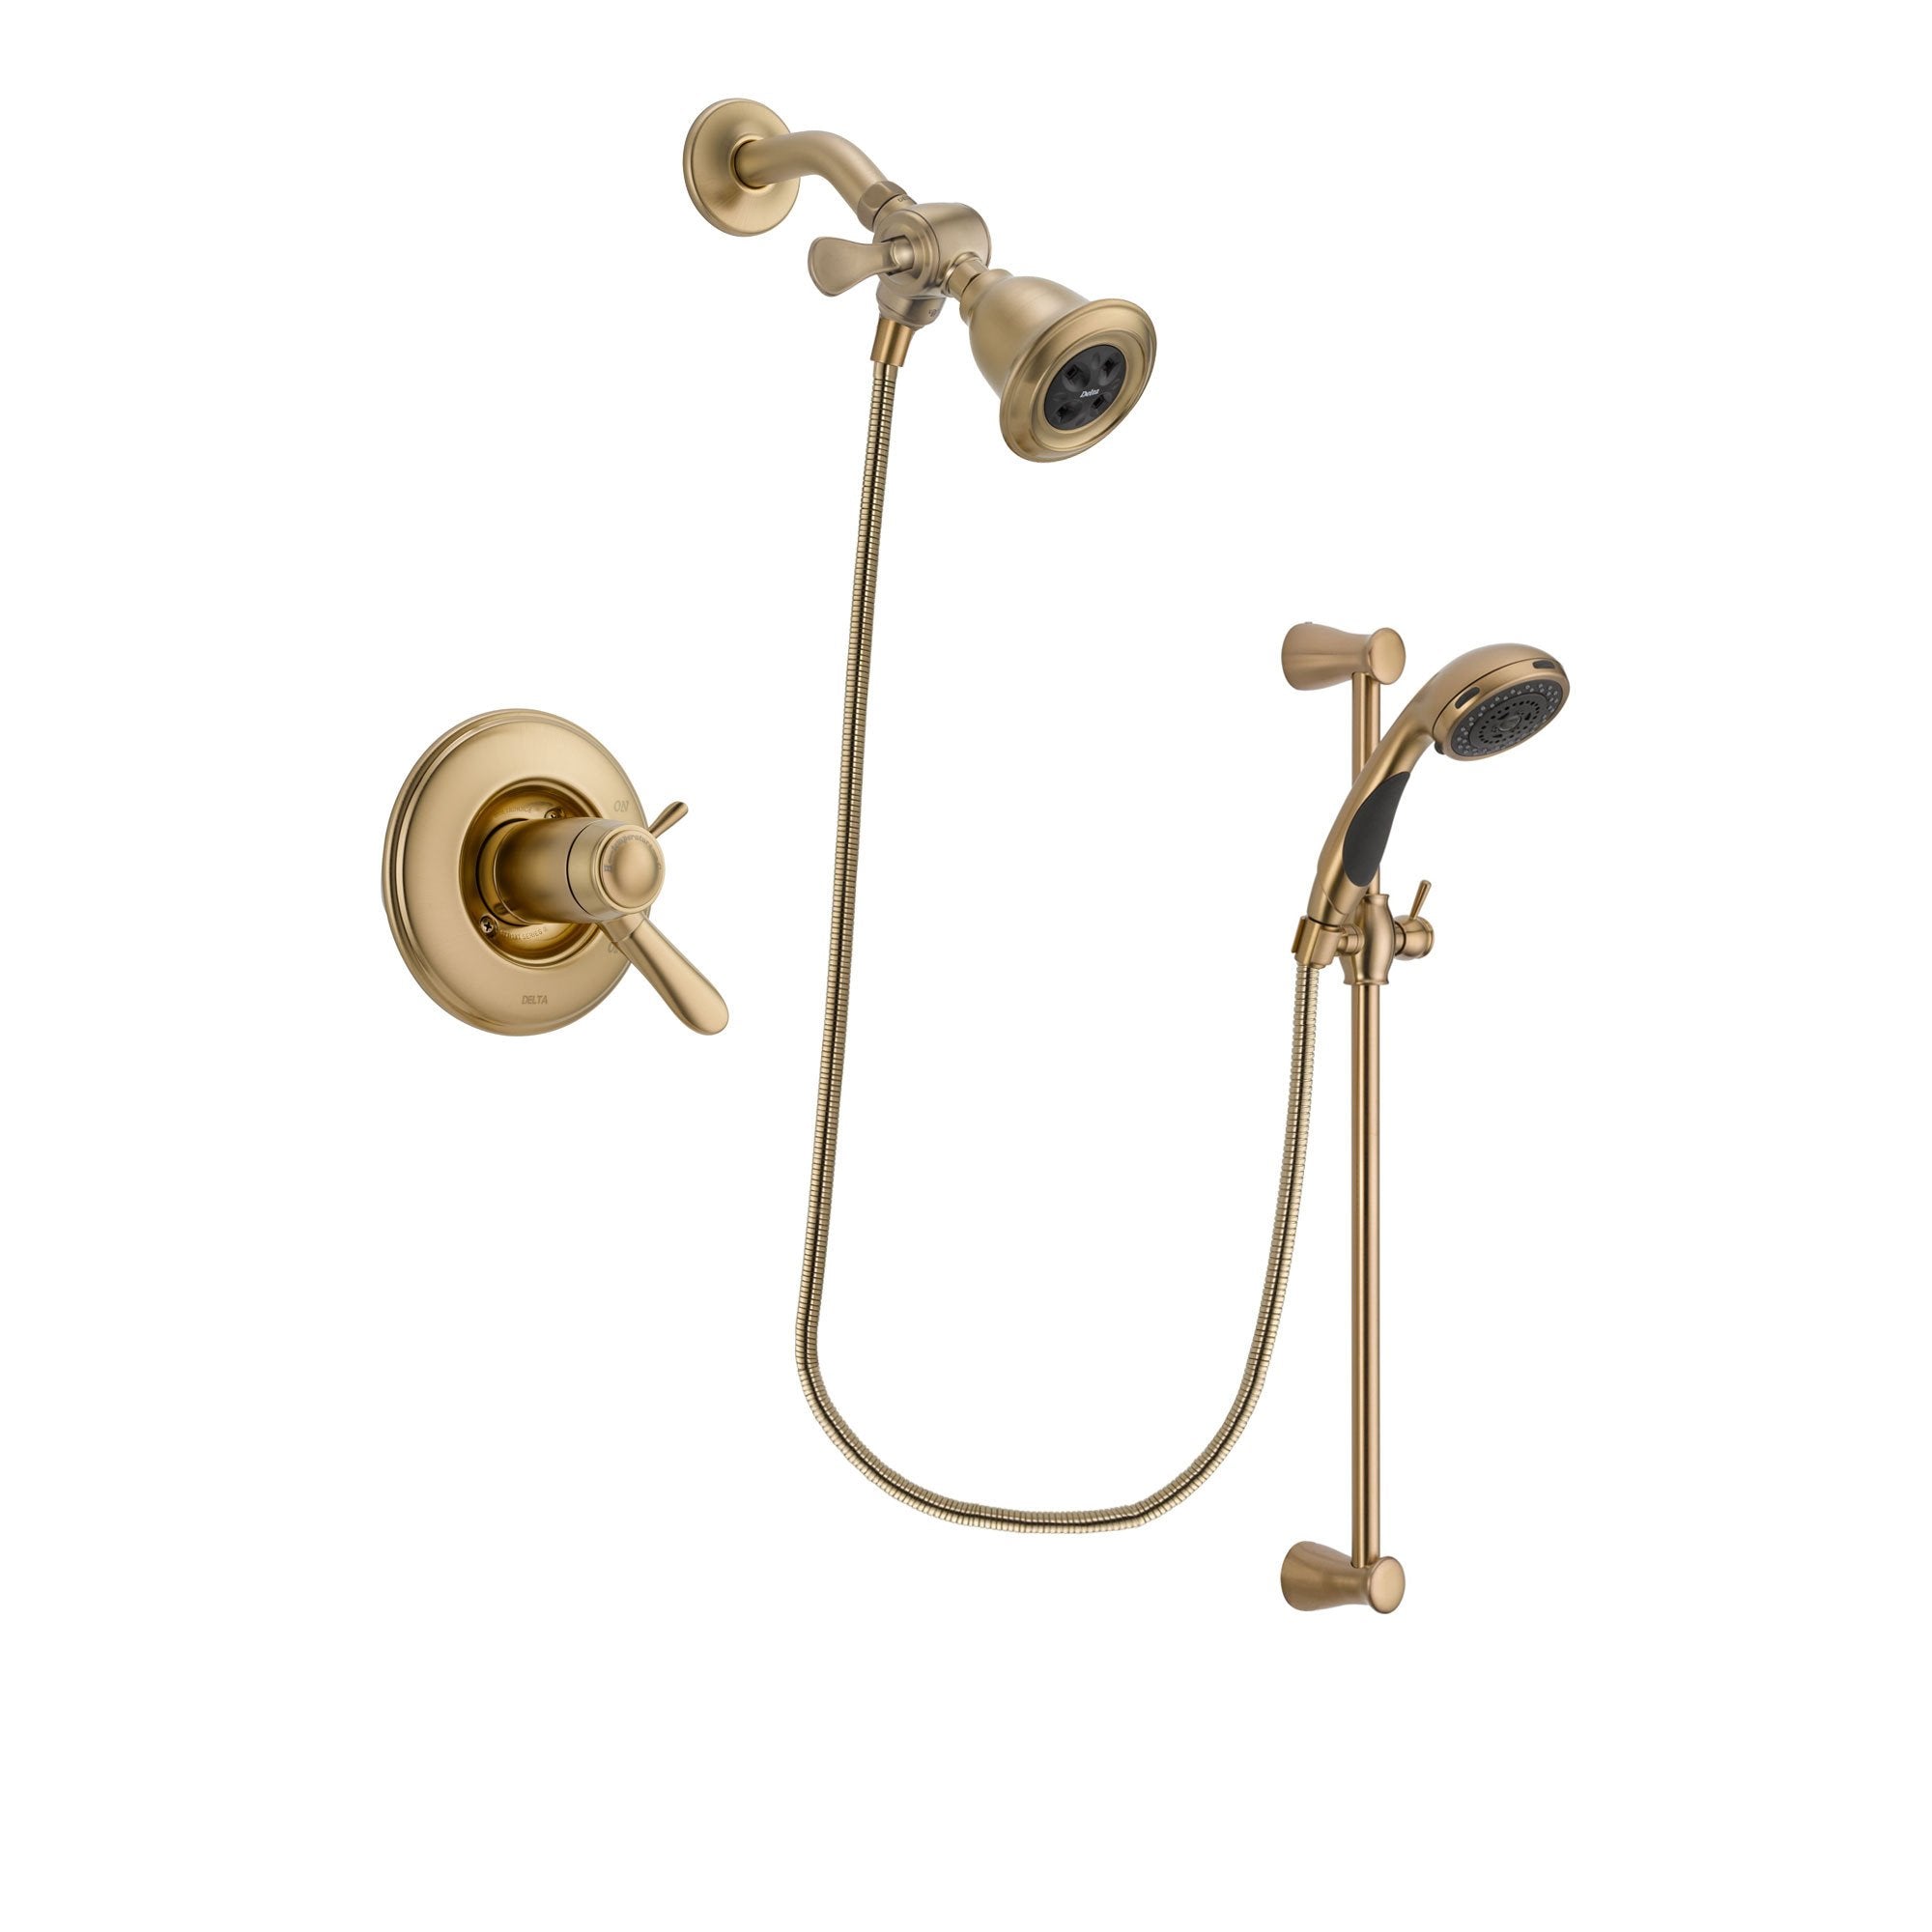 Delta Lahara Champagne Bronze Finish Thermostatic Shower Faucet System Package with Water Efficient Showerhead and Personal Handheld Shower Sprayer with Slide Bar Includes Rough-in Valve DSP3448V